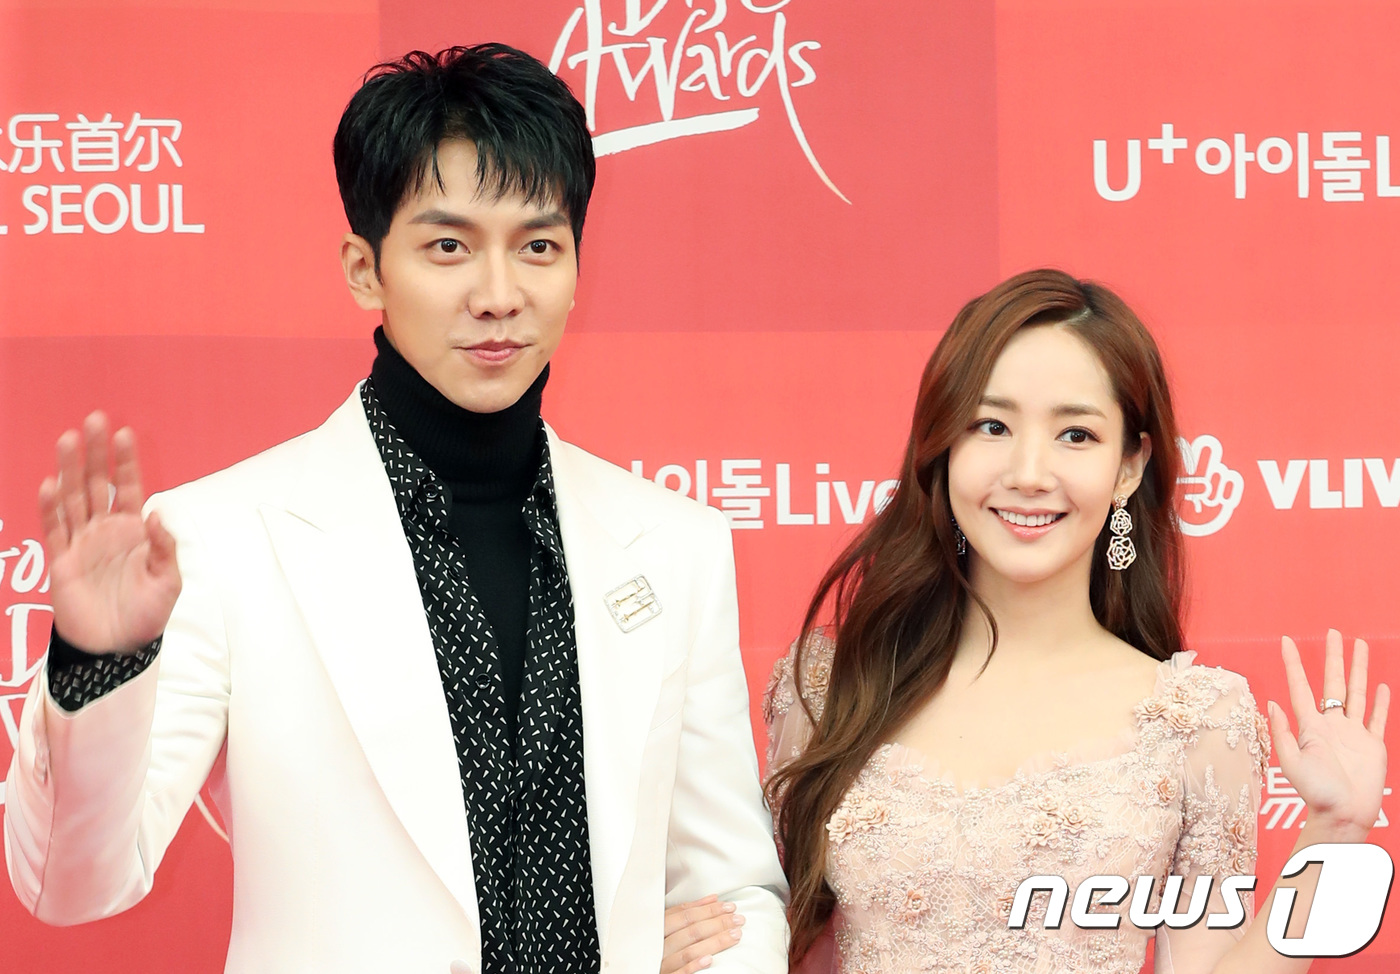 Seoul: = Actors Lee Seung-gi and Park Min-young (right) pose at the 33rd Golden Disk Awards red carpet event held at Gocheok Sky Dome in Guro-gu, Seoul on the afternoon of the 5th.2019.1.5